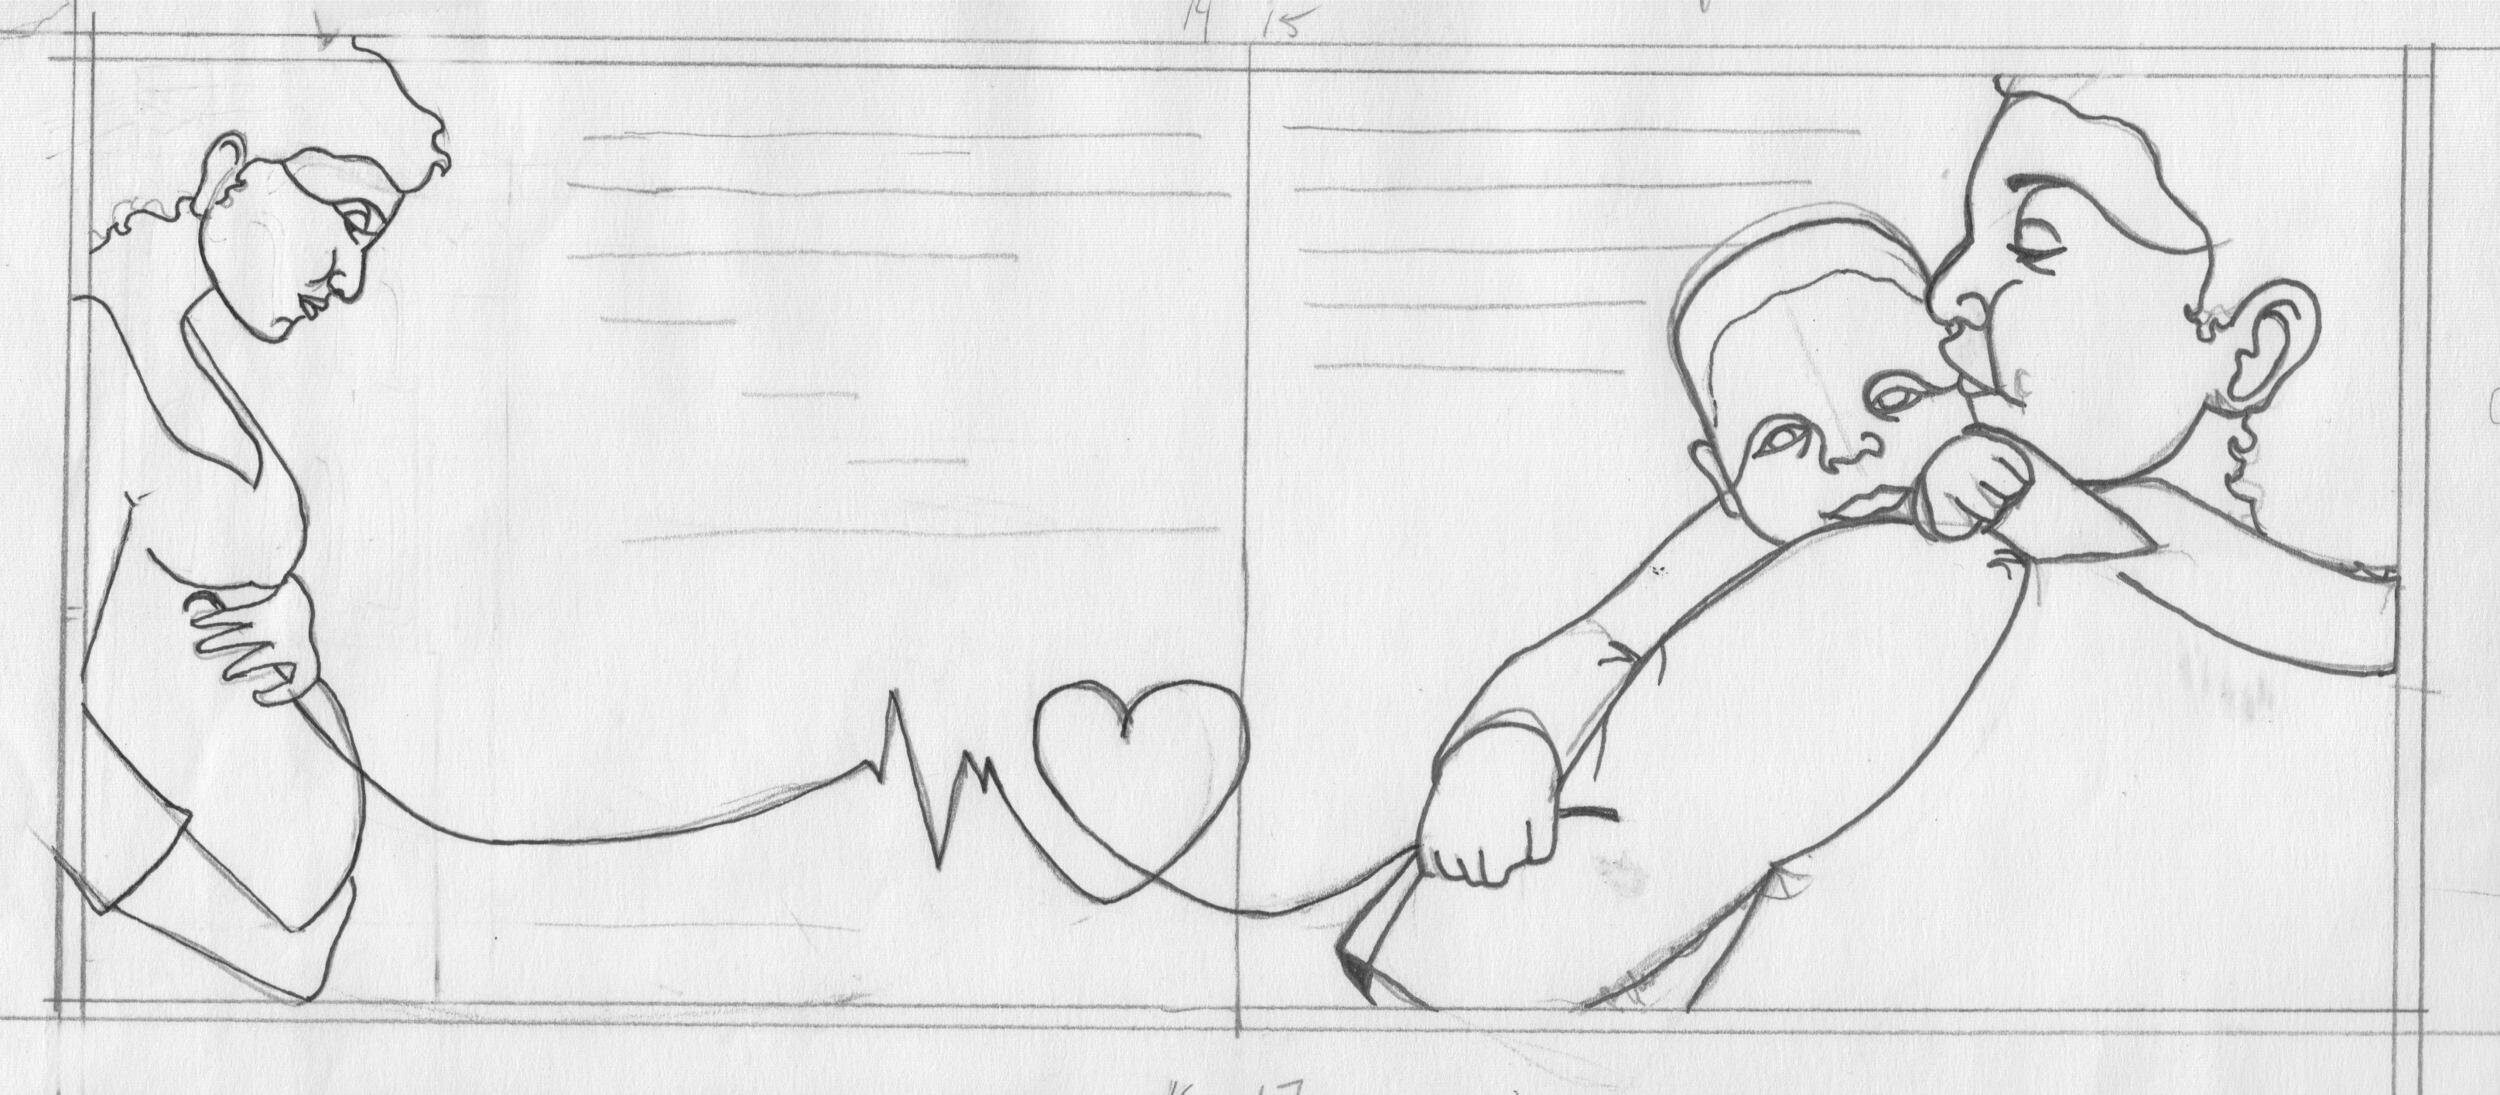 An illustration of a pregnant woman on the left holding a string that turns into a heartbeat and then into a heart shape.  On the right side of the image, a small child holds the other end of the string and is held by his father. 